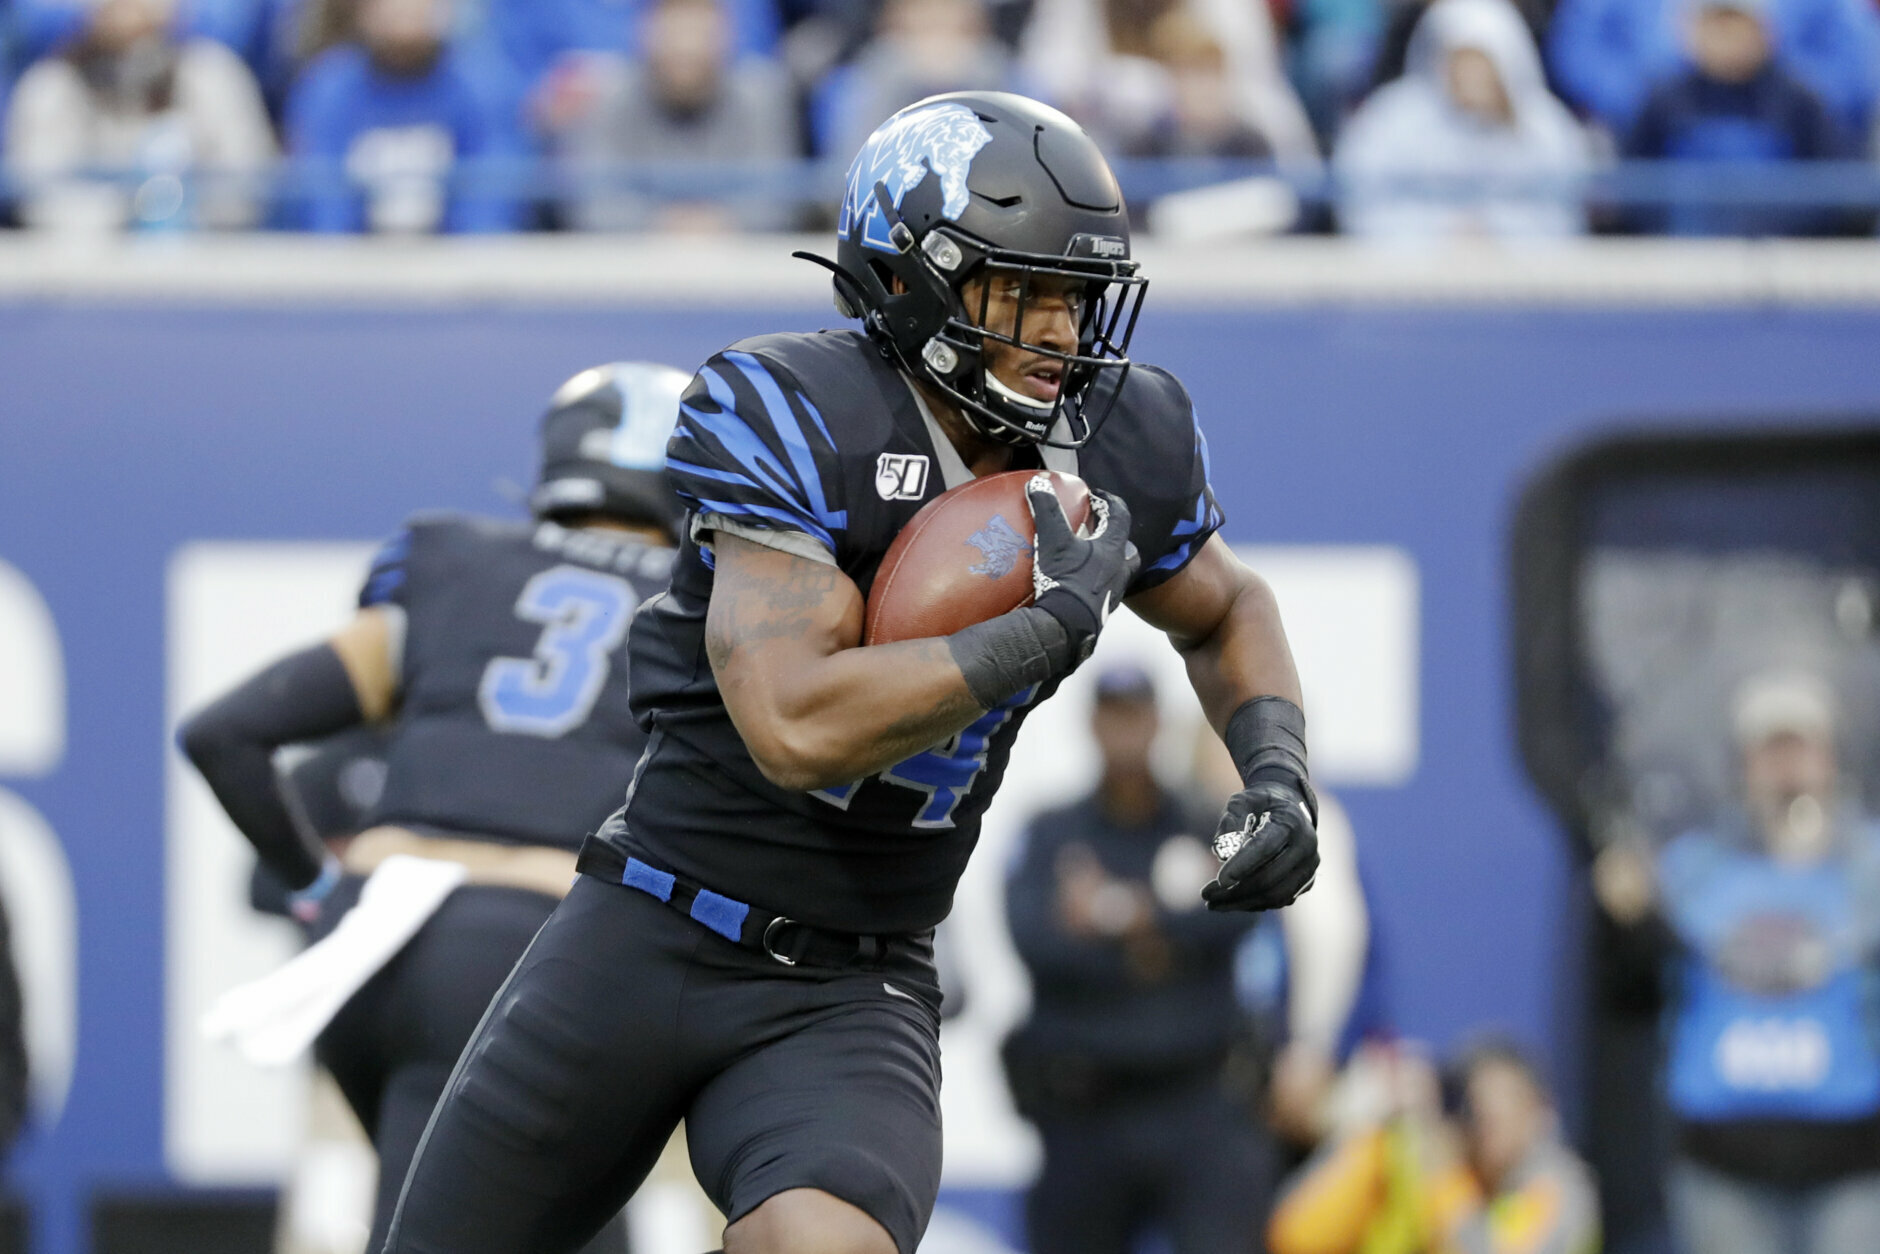 <p><b>3rd Round (66th overall): Antonio Gibson — RB/WR, Memphis</b><b> </b></p>
<p>This pick initially stunned me because of the Redskins&#8217; depth at running back but upon further review, this is the first of several selections that indicate what Rivera values most: Versatility.</p>
<p>Gibson has been widely compared to Christian McCaffrey, who was the best all-around back in the league last season under now-Redskins OC Scott Turner. Like CMC, Gibson is a big, fast player who can run, catch and return kicks — and the &#8216;Skins are in need of all three roles. Gibson&#8217;s impact may not be immediate but in this offense, it feels inevitable. <b>Grade: A</b></p>
